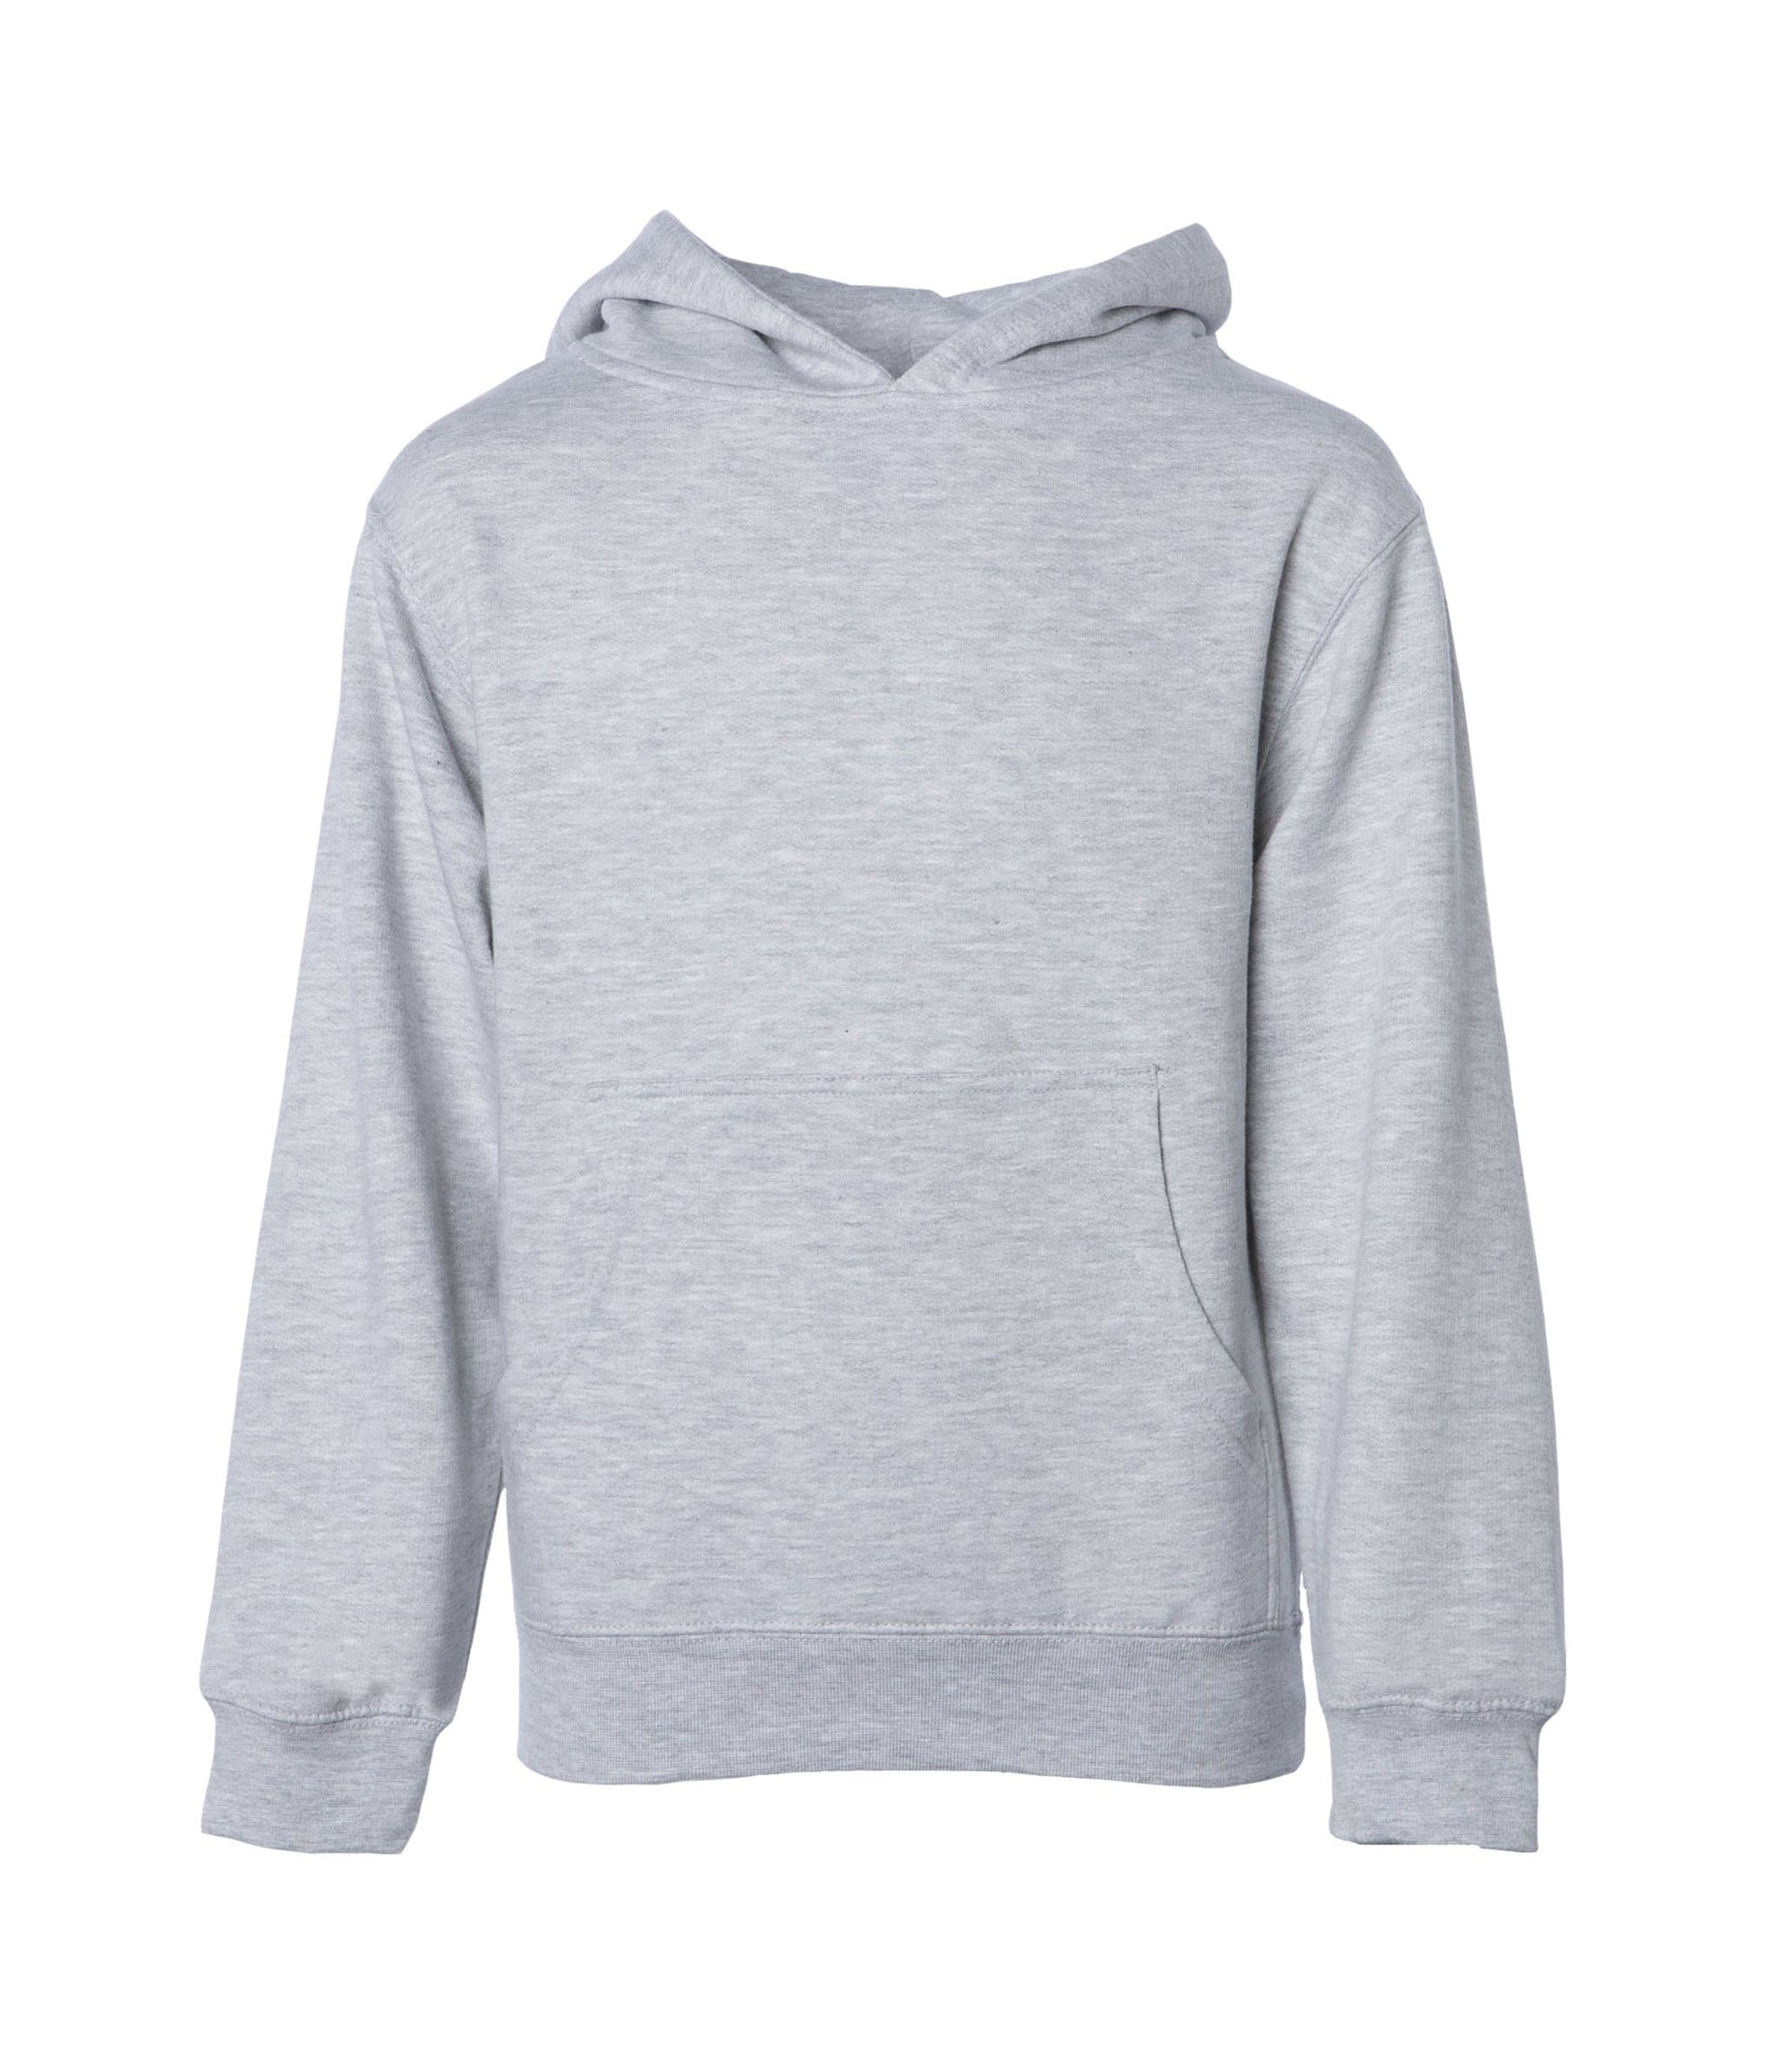 SS4001Y Youth Midweight Pullover Hooded Sweatshirt - Grey